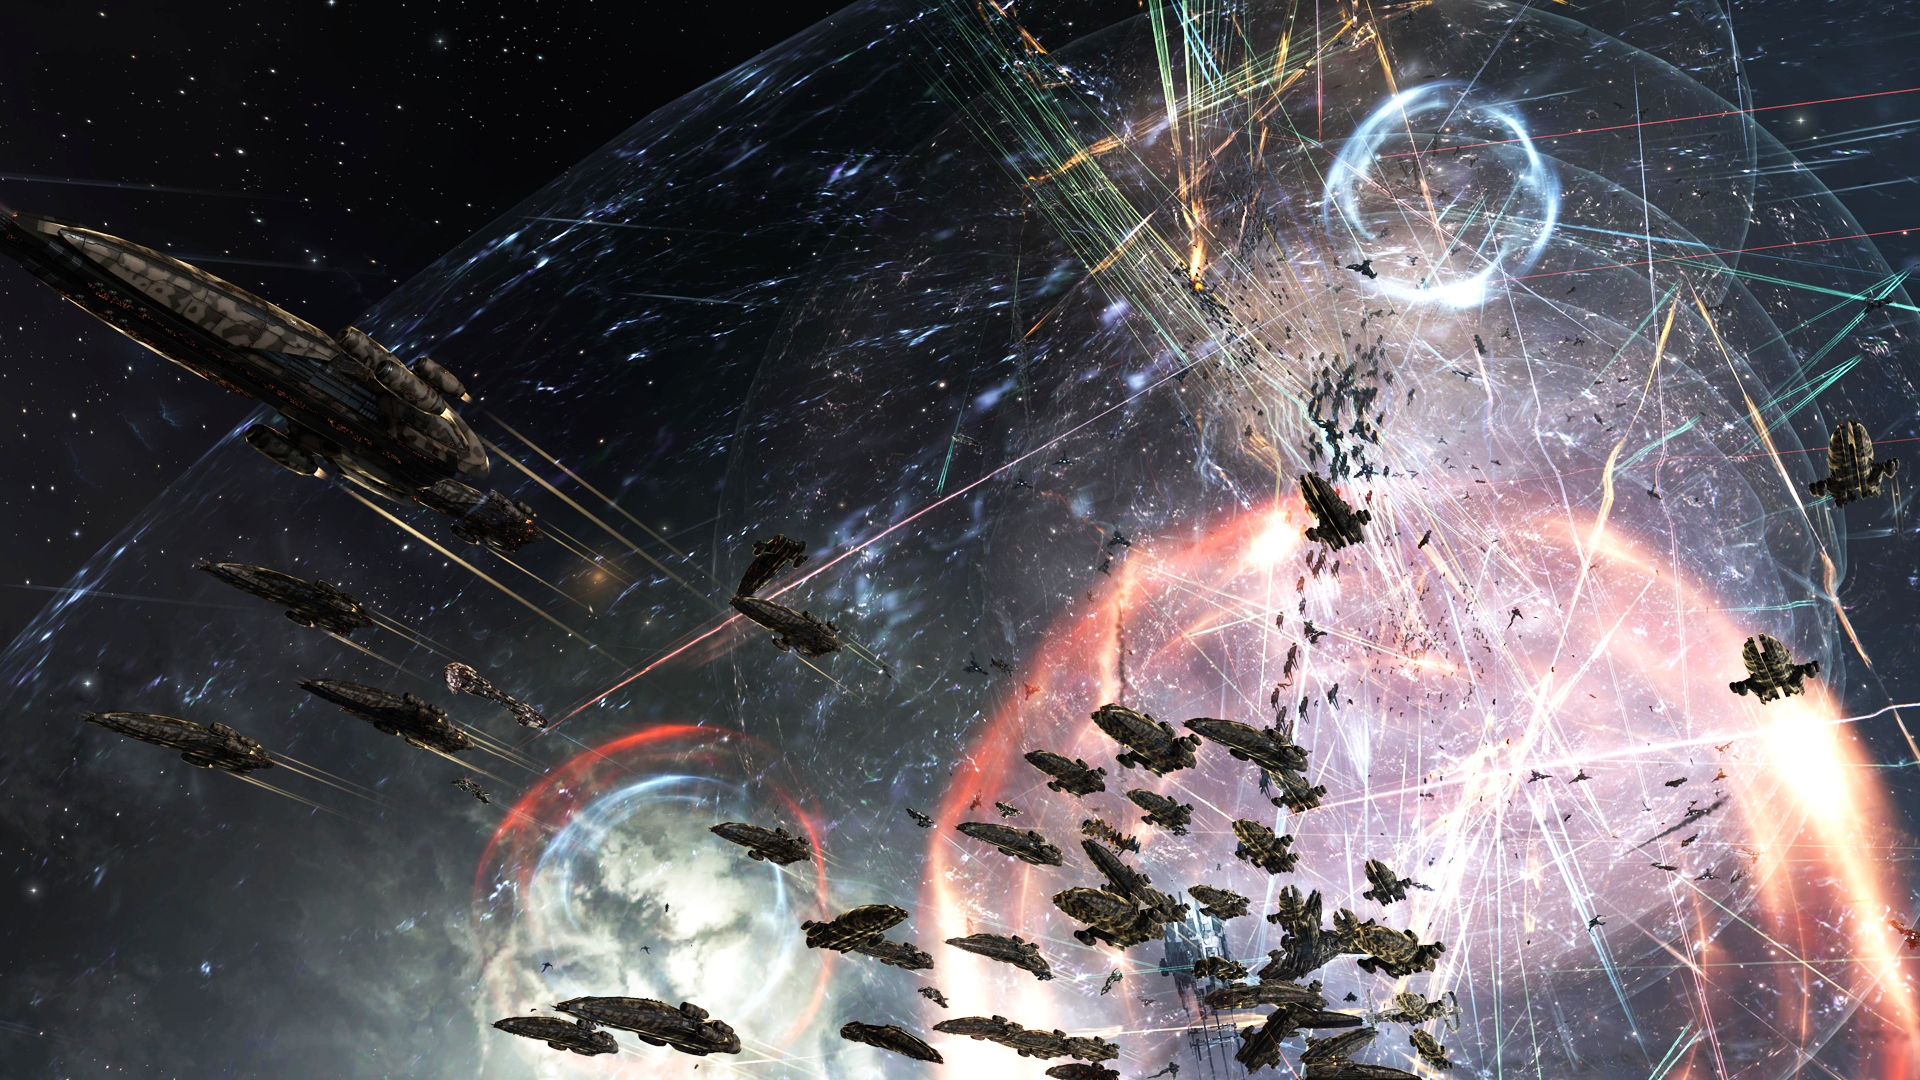 Free Steam games - EVE Online - A fleet of ships in combat